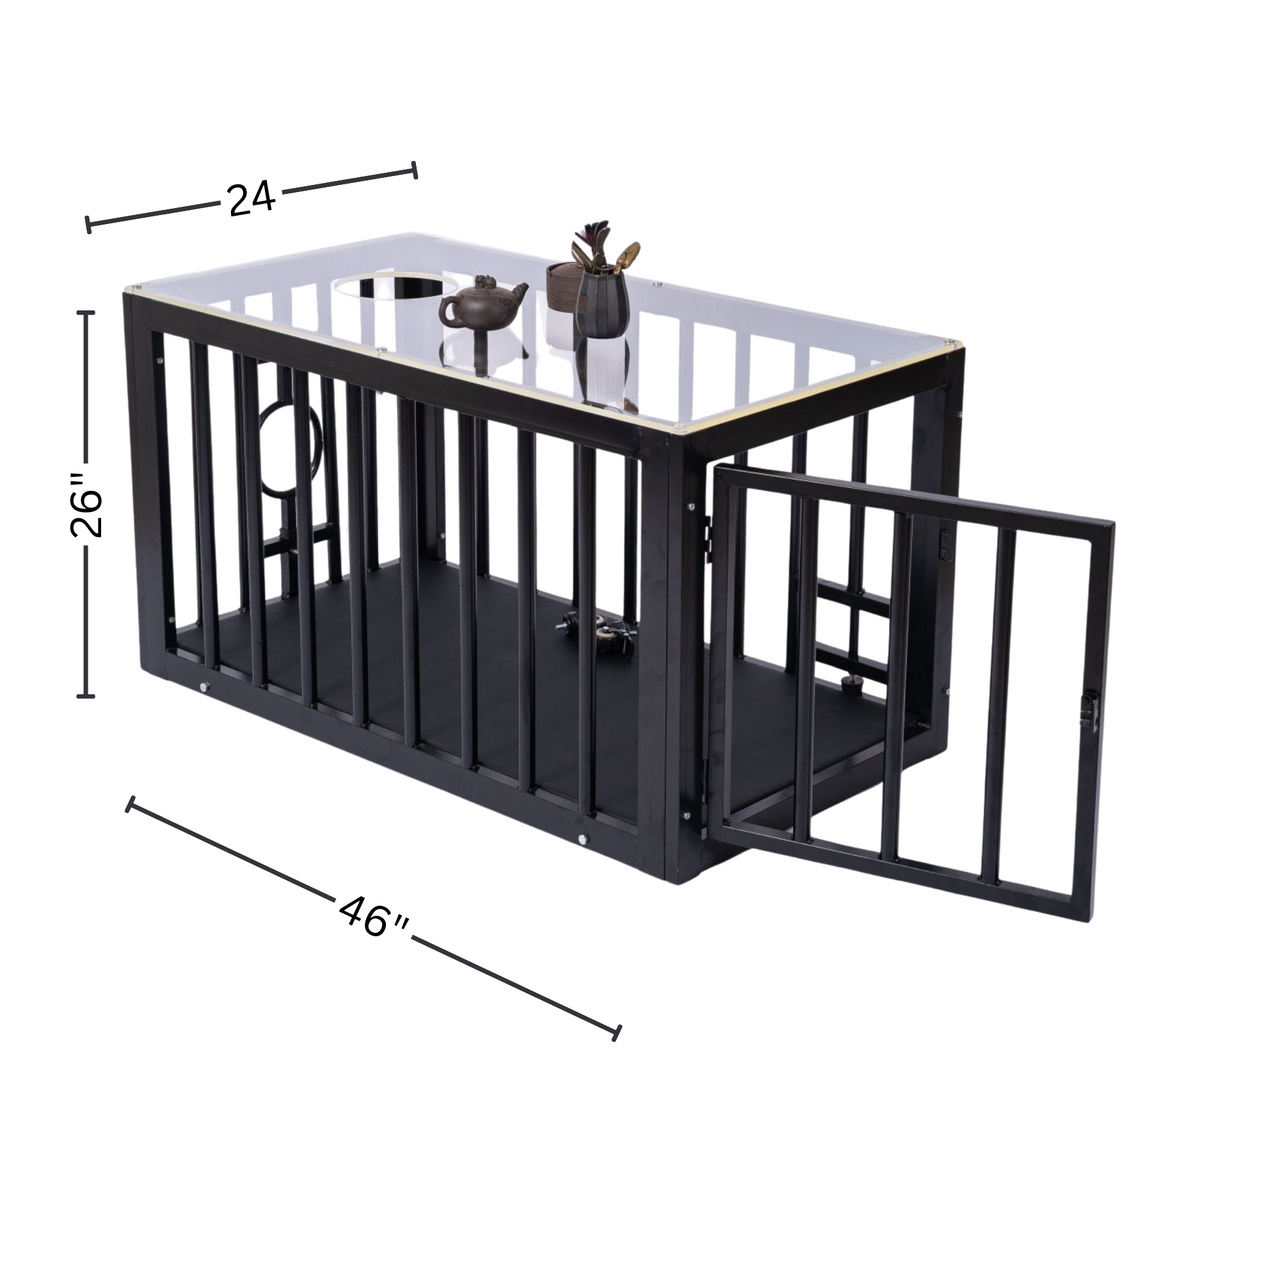 Roomsacred Black Steel Coffee Table BDSM Cage with Black Padded Floor & Clear Acrylic Top